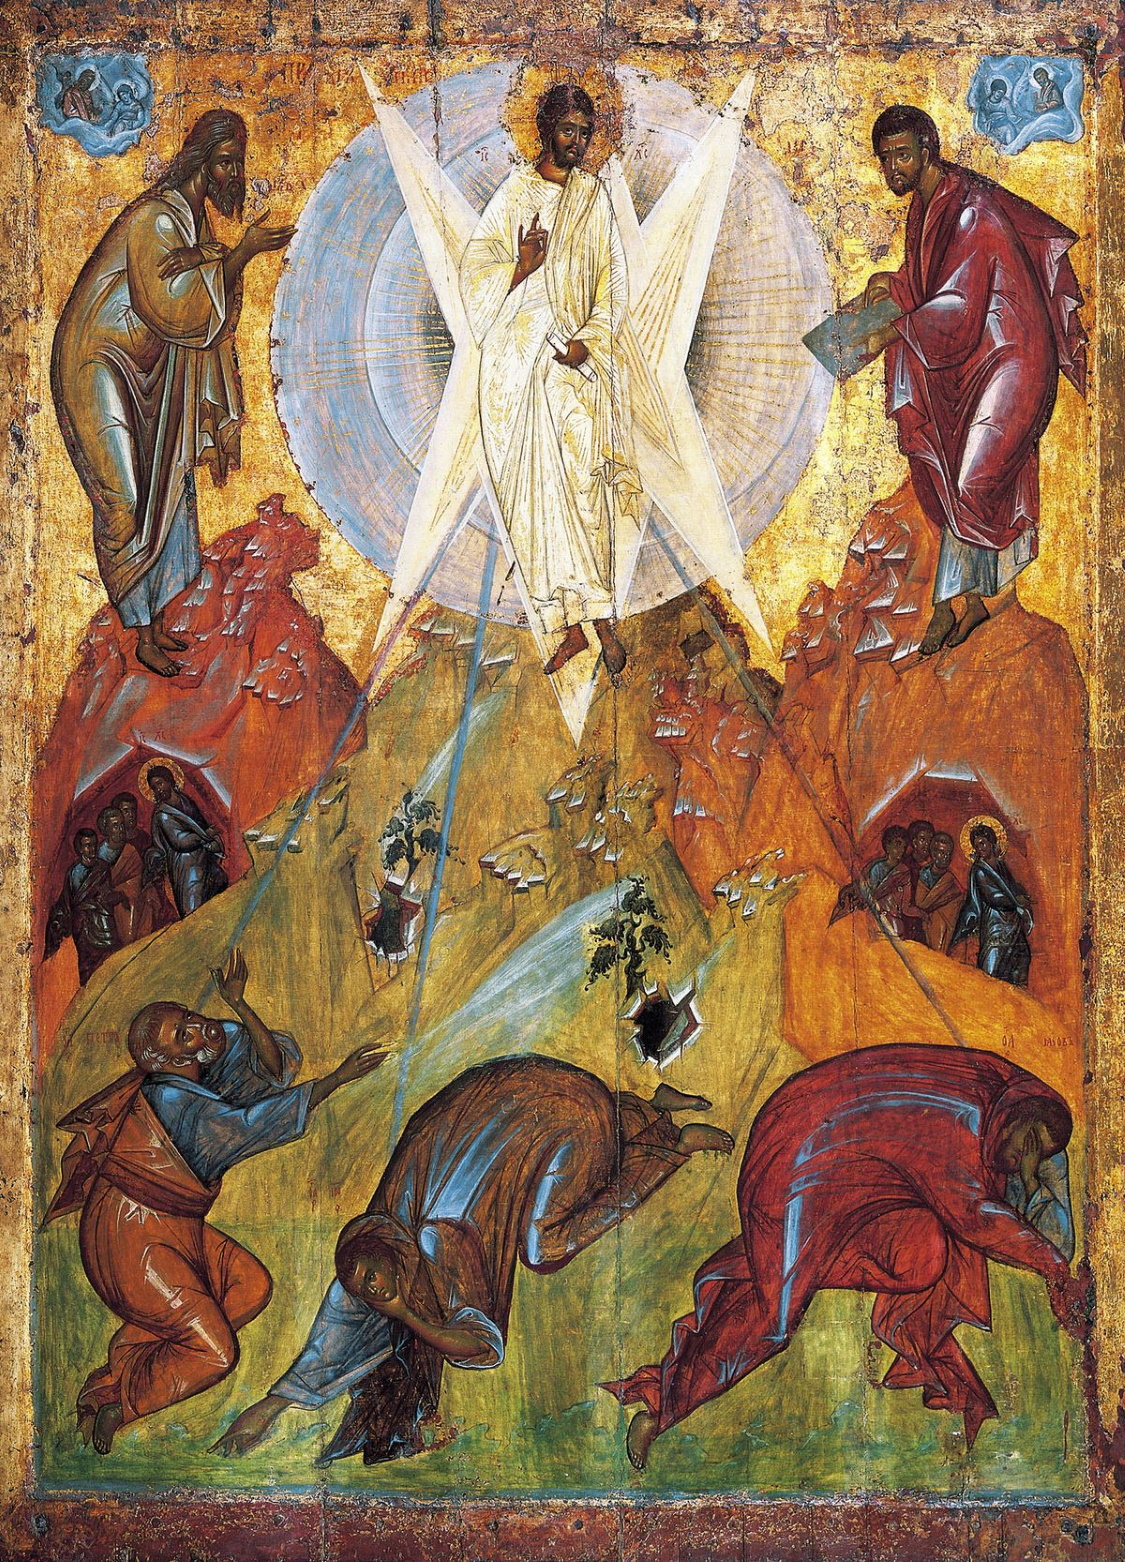 The Transfiguration of Our Lord and Savior Jesus Christ